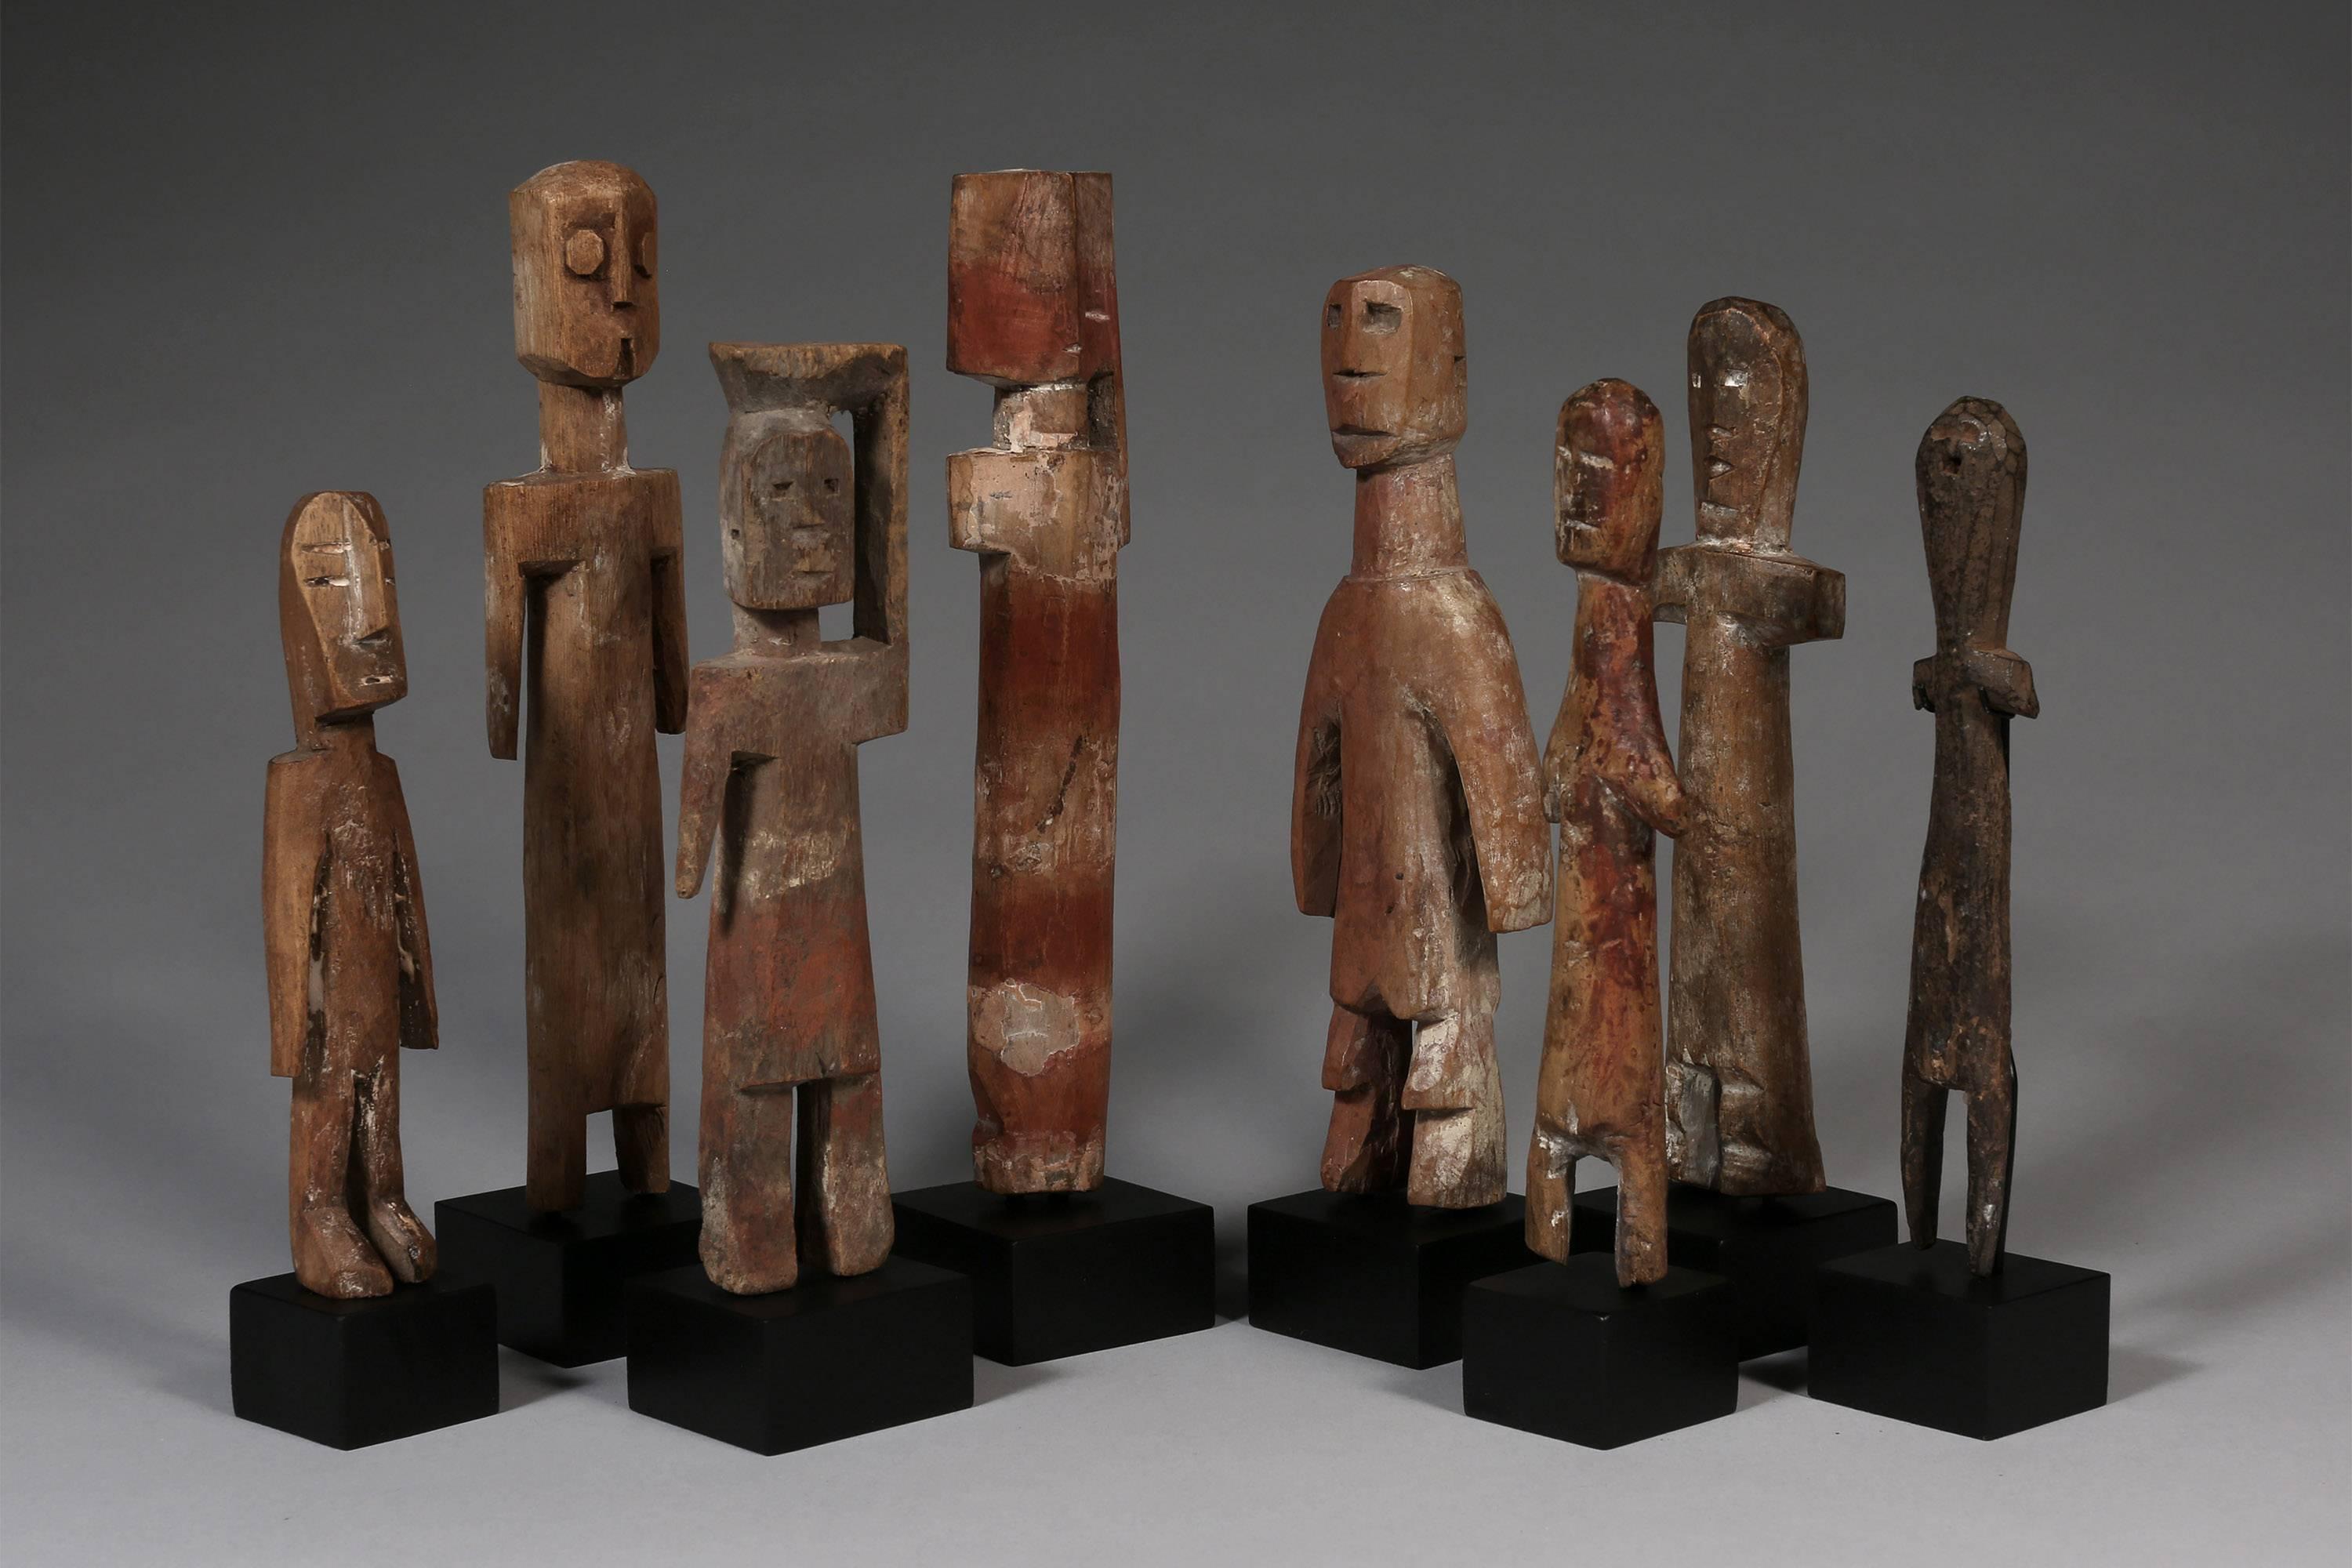 20th century eight doll like ancestor figure sculptures Adan culture Ghana Africa

A collection of eight hand-carved, wooden figures with natural pigments and individually based. Each with it's own character and form. The group of figures create a